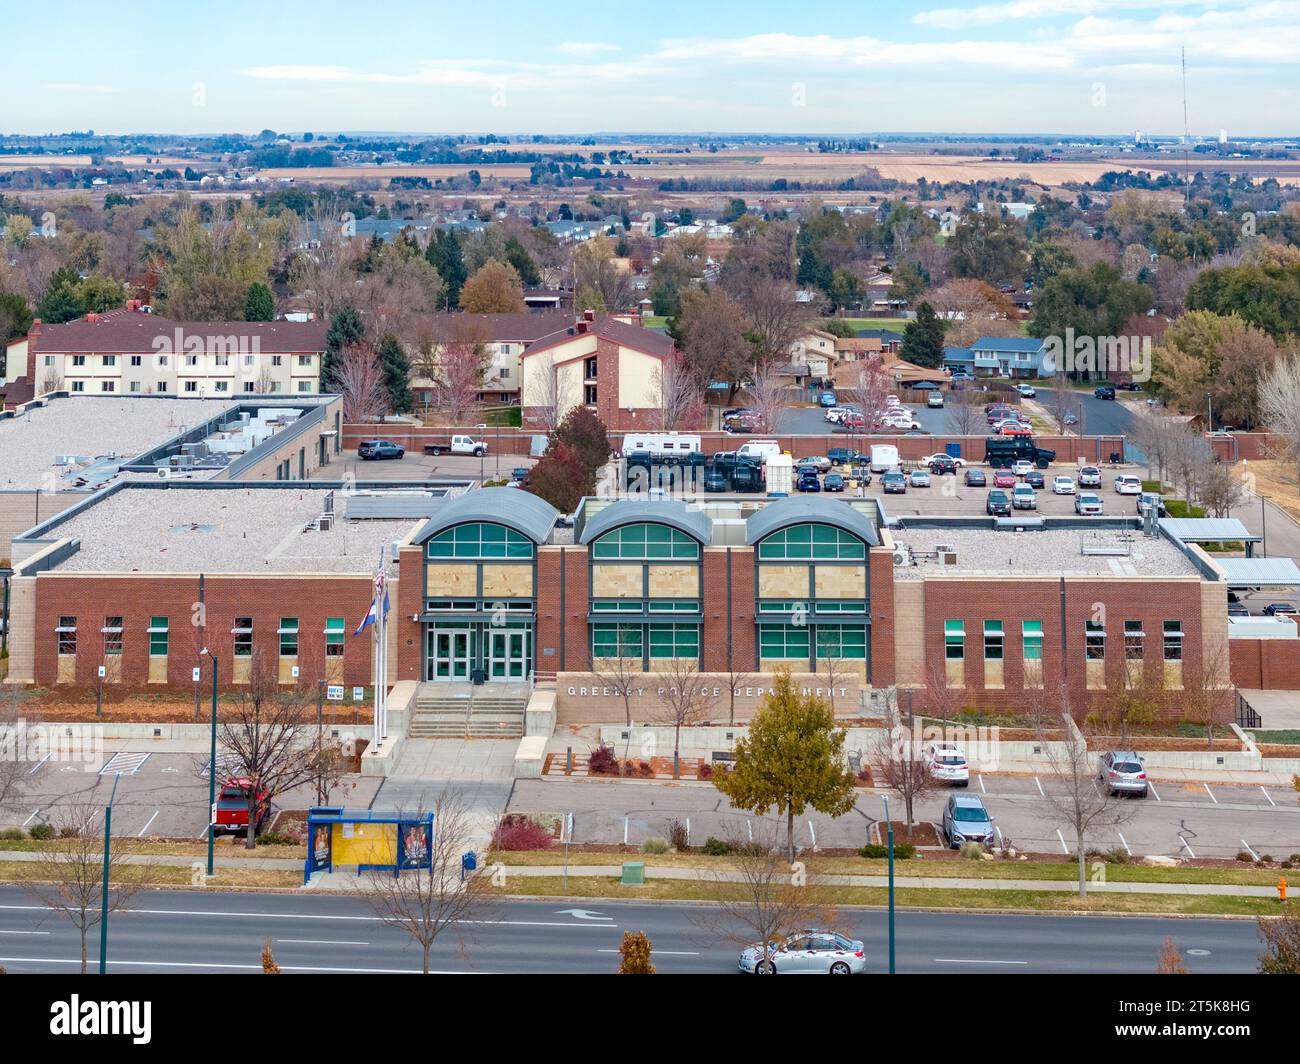 Greeley Police Department drone video front facade. 4k Stock Photo